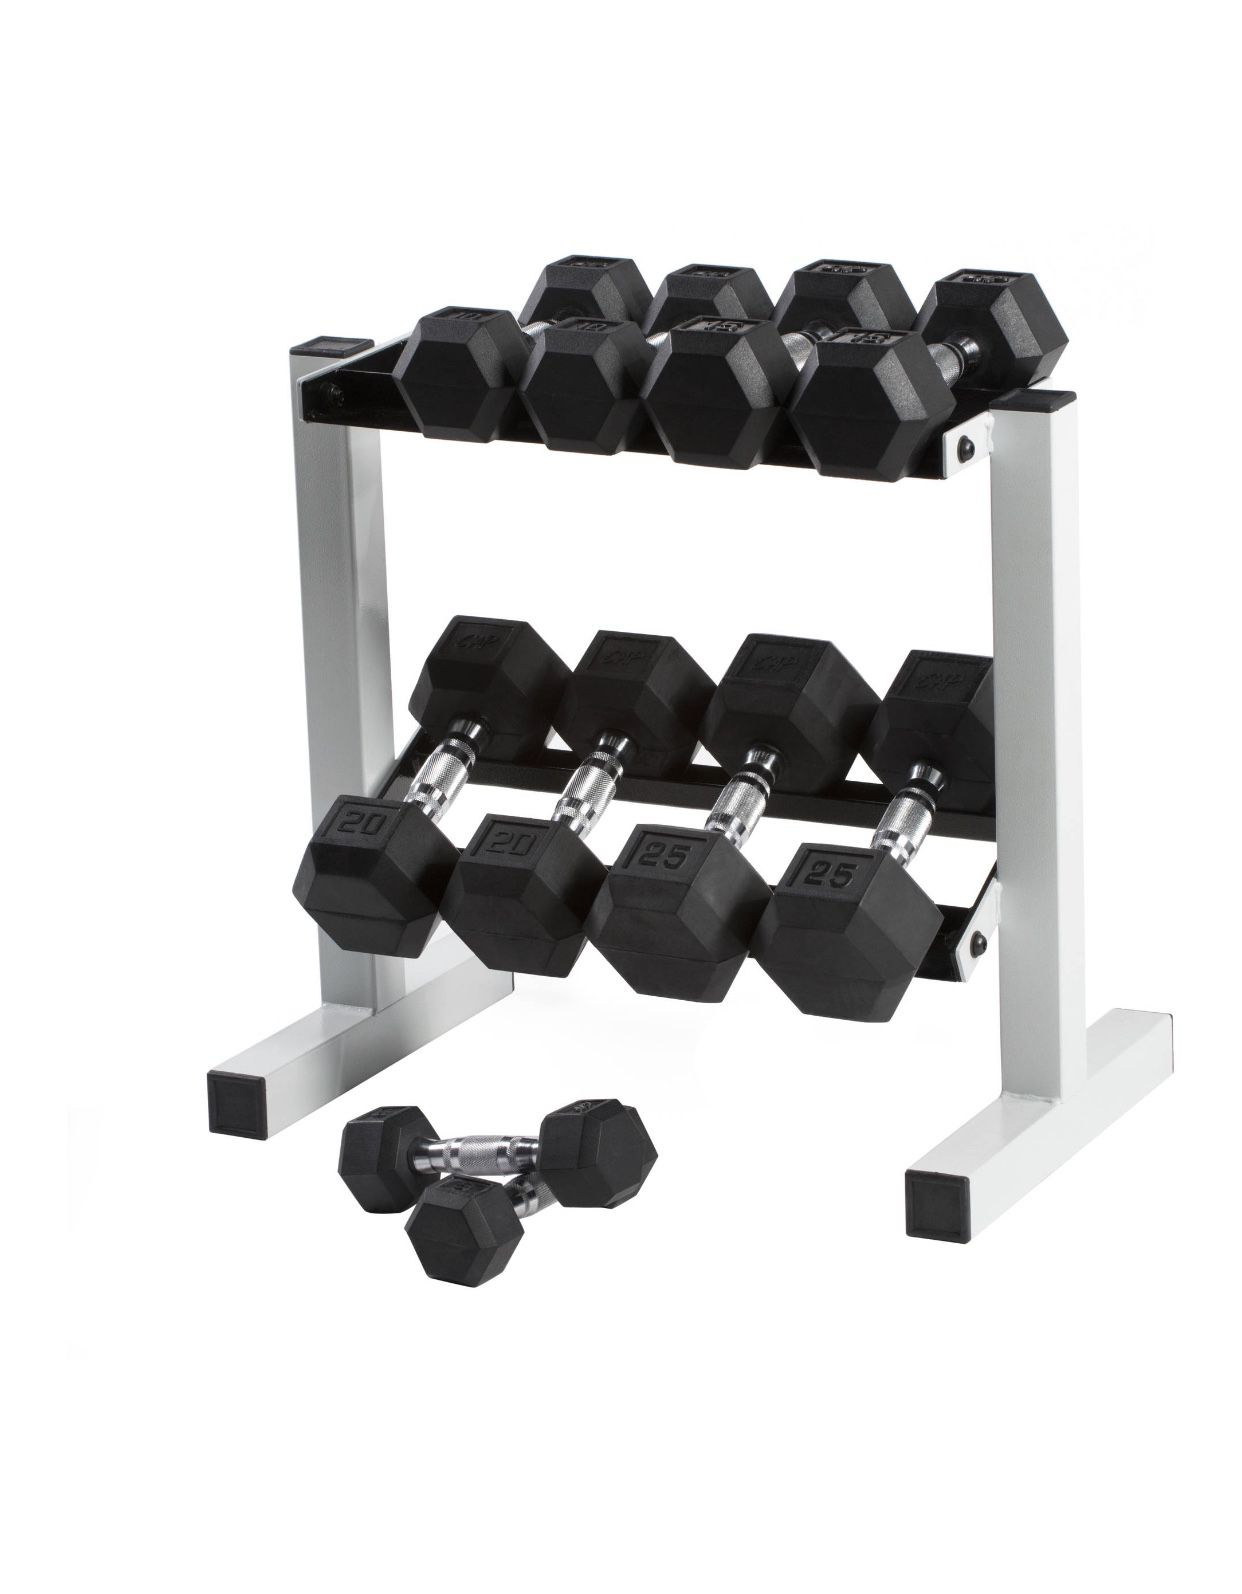 RACK ONLY CAP Rubber Hex Dumbbell Rack, Weights are not included (L x W x H) 27.17 x 18.11 x 3.94 Inches